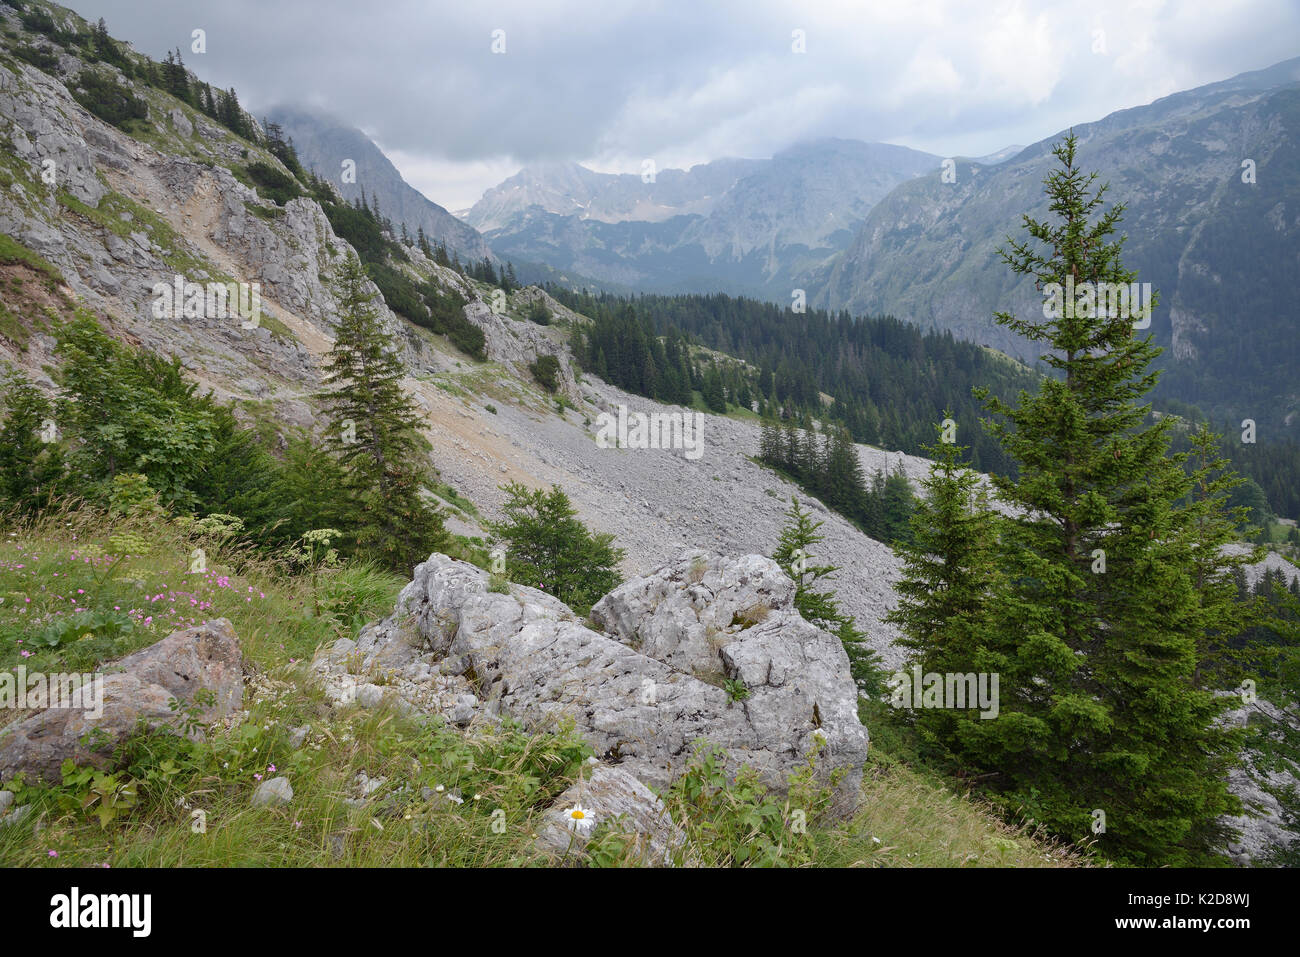 Limestone boulders and scree on the slopes of Mount Maglic, Bosnia's highest mountain, with a view to Velika Vitao peak in Montenegro across the nearby border, Sutjeska National Park, Bosnia and Herzegovina, July 2014. Stock Photo